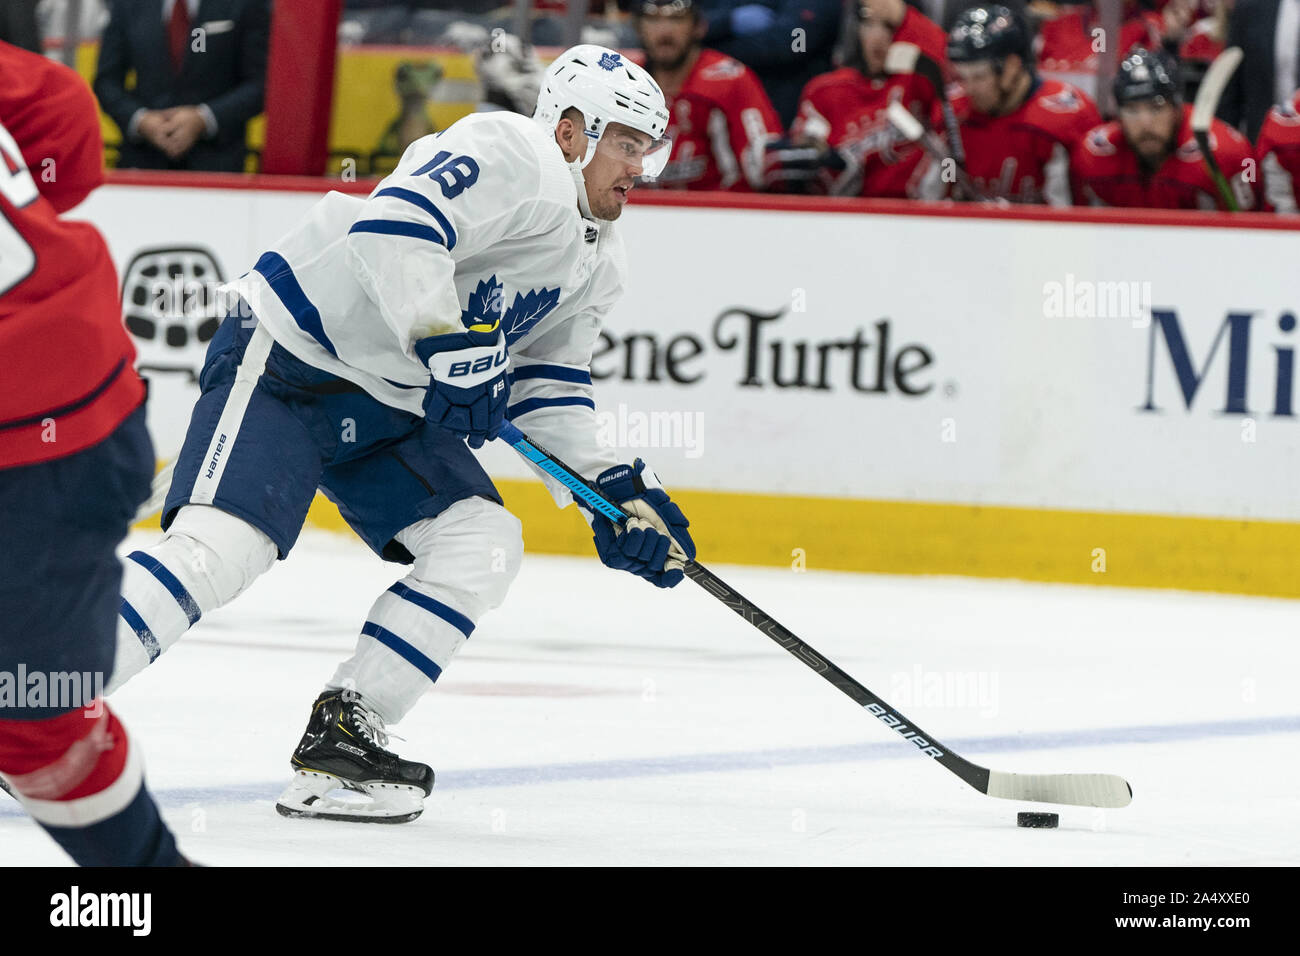 Washington, United States. 16th Oct, 2019. Toronto Maple Leafs left wing Andreas Johnsson (18) carries the puck during the first period at Capital One Arena in Washington, DC on Wednesday, October 16, 2019. The Capitals host the Toronto Maple Leafs to start a 3 game home stand tonight. Photo by Alex Edelman/UPI Credit: UPI/Alamy Live News Stock Photo